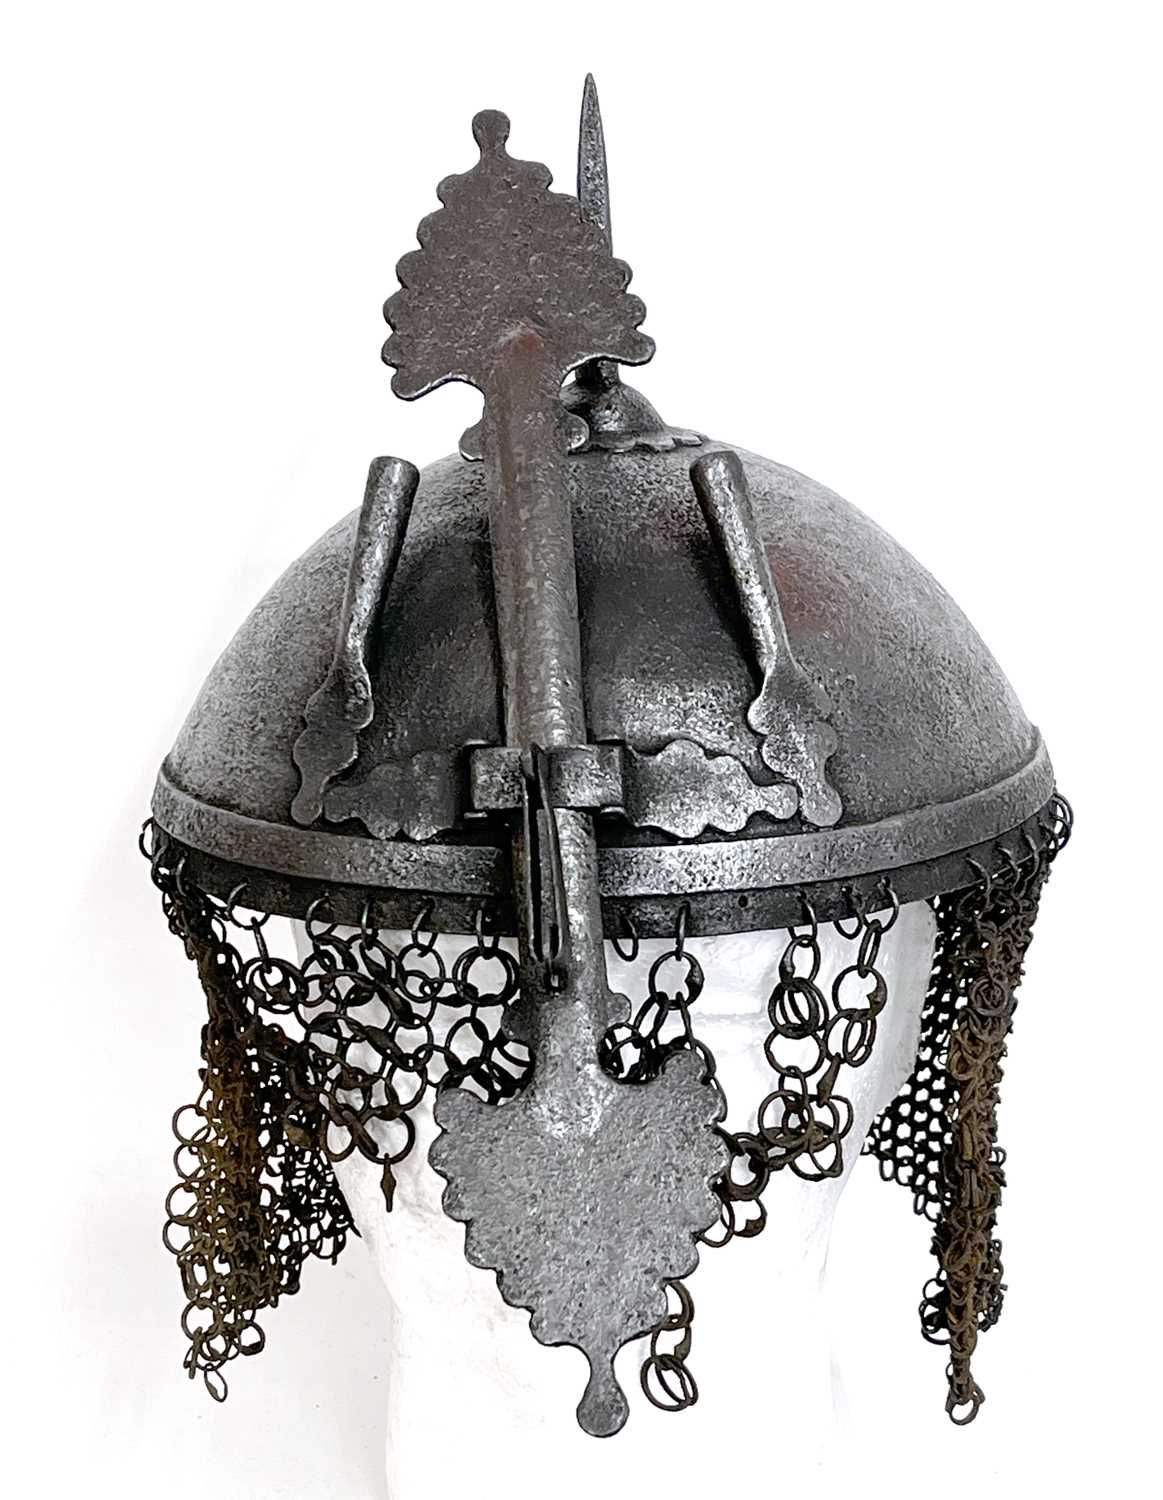 Late 19th Century Indo-Persian Kula - Khud helmet with a sliding nasal bar, twin plume sockets and